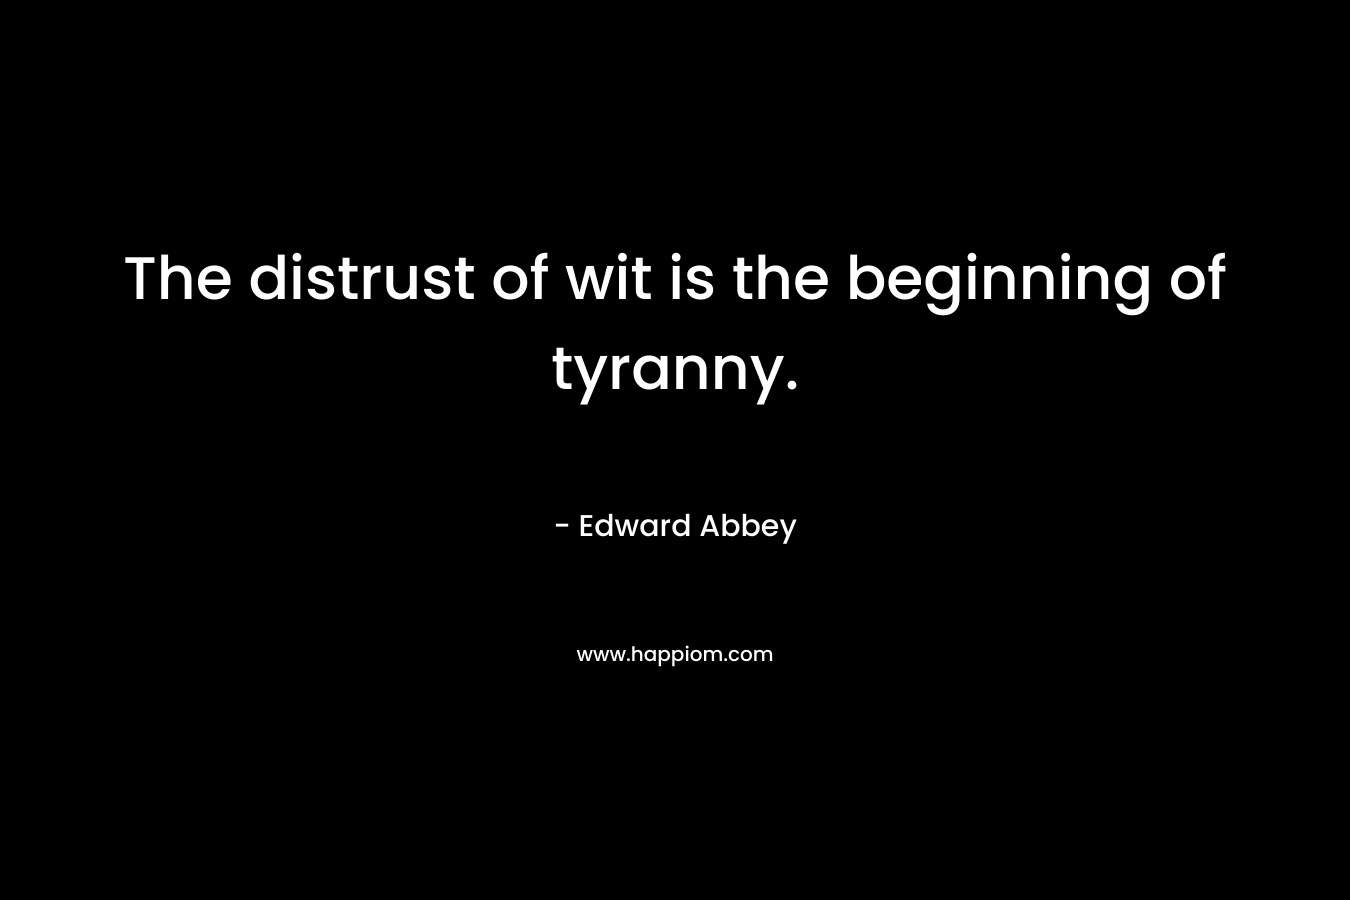 The distrust of wit is the beginning of tyranny. – Edward Abbey